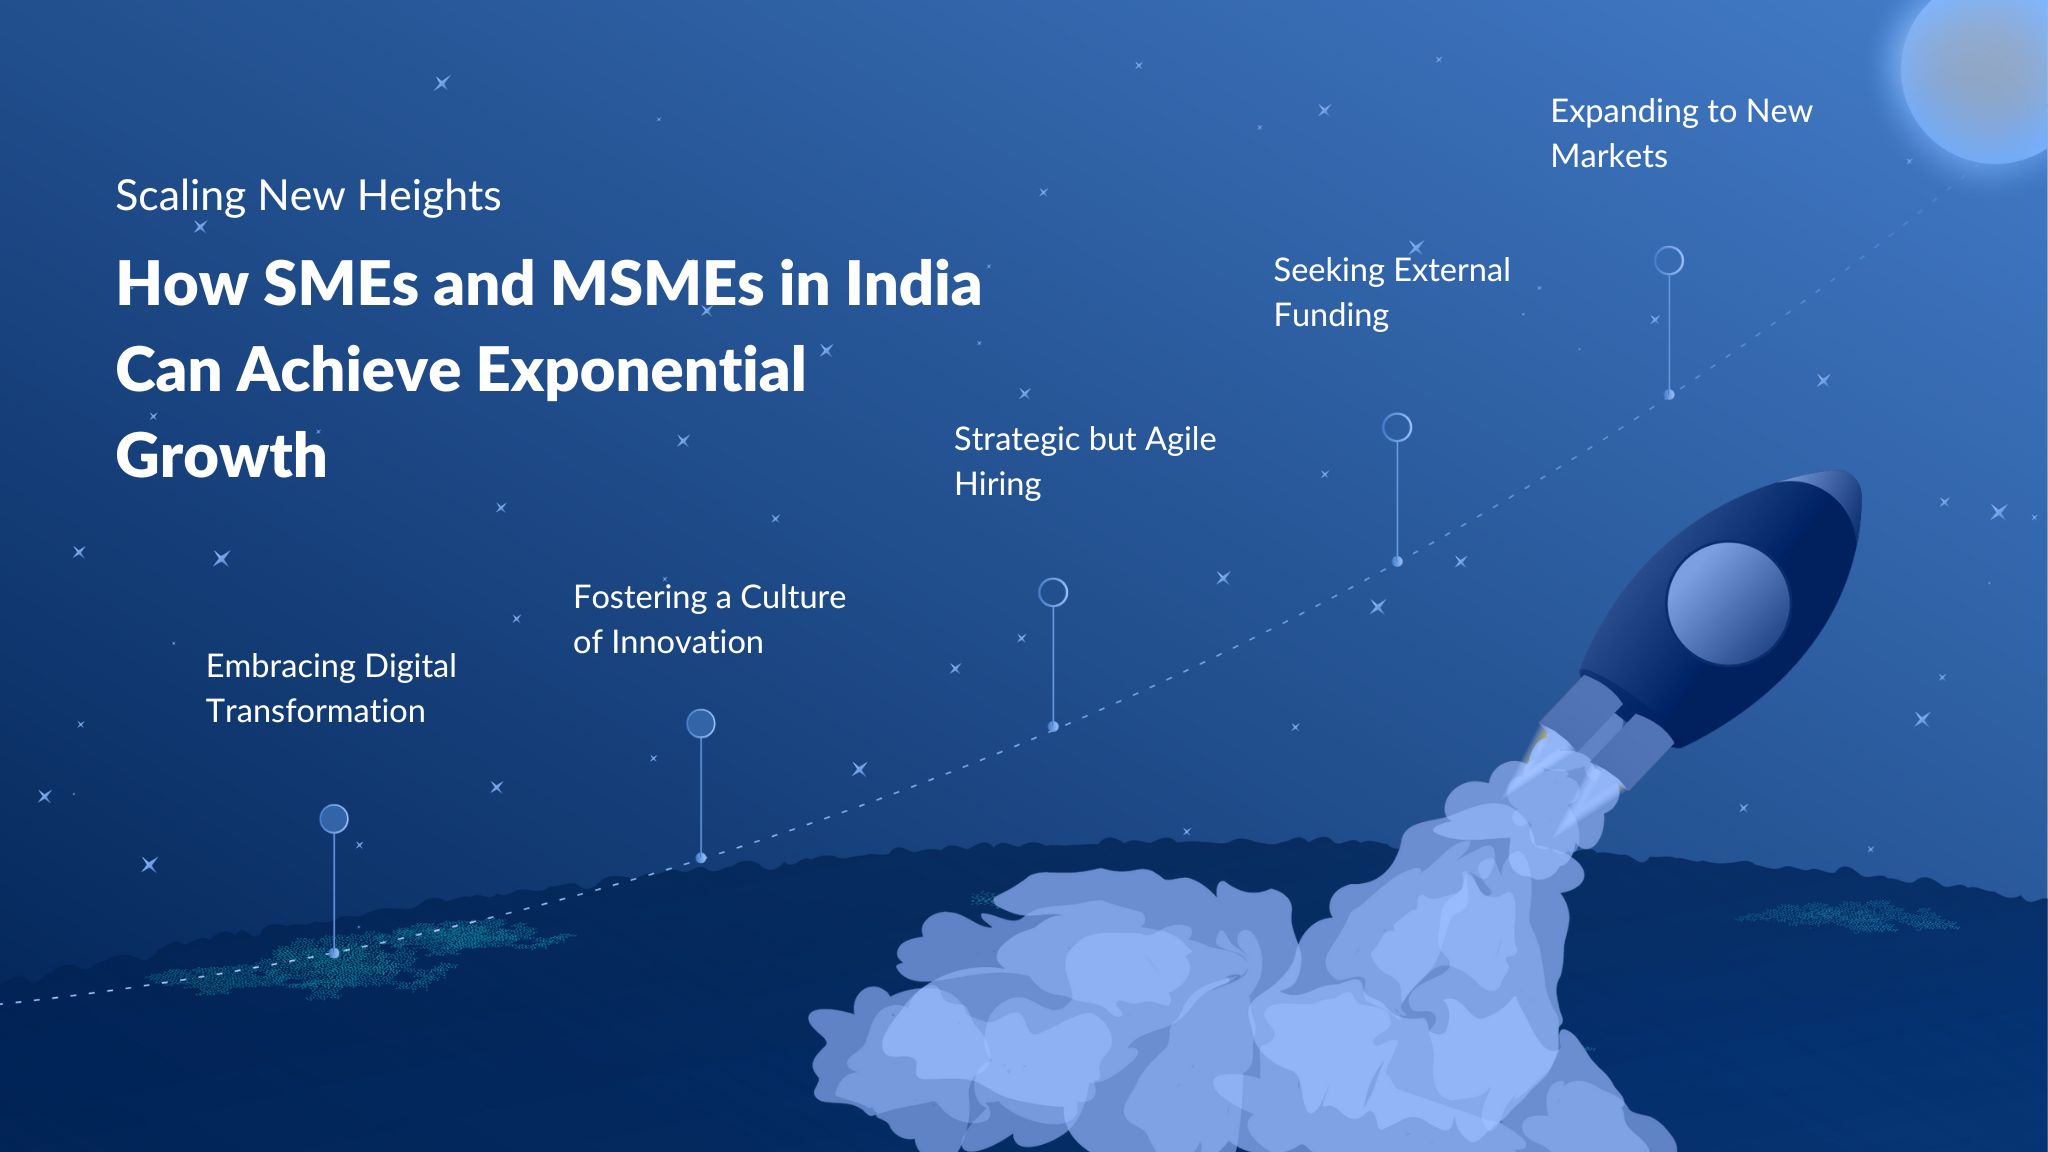 Scaling New Heights: How SMEs and MSMEs in India Can Achieve Exponential Growth